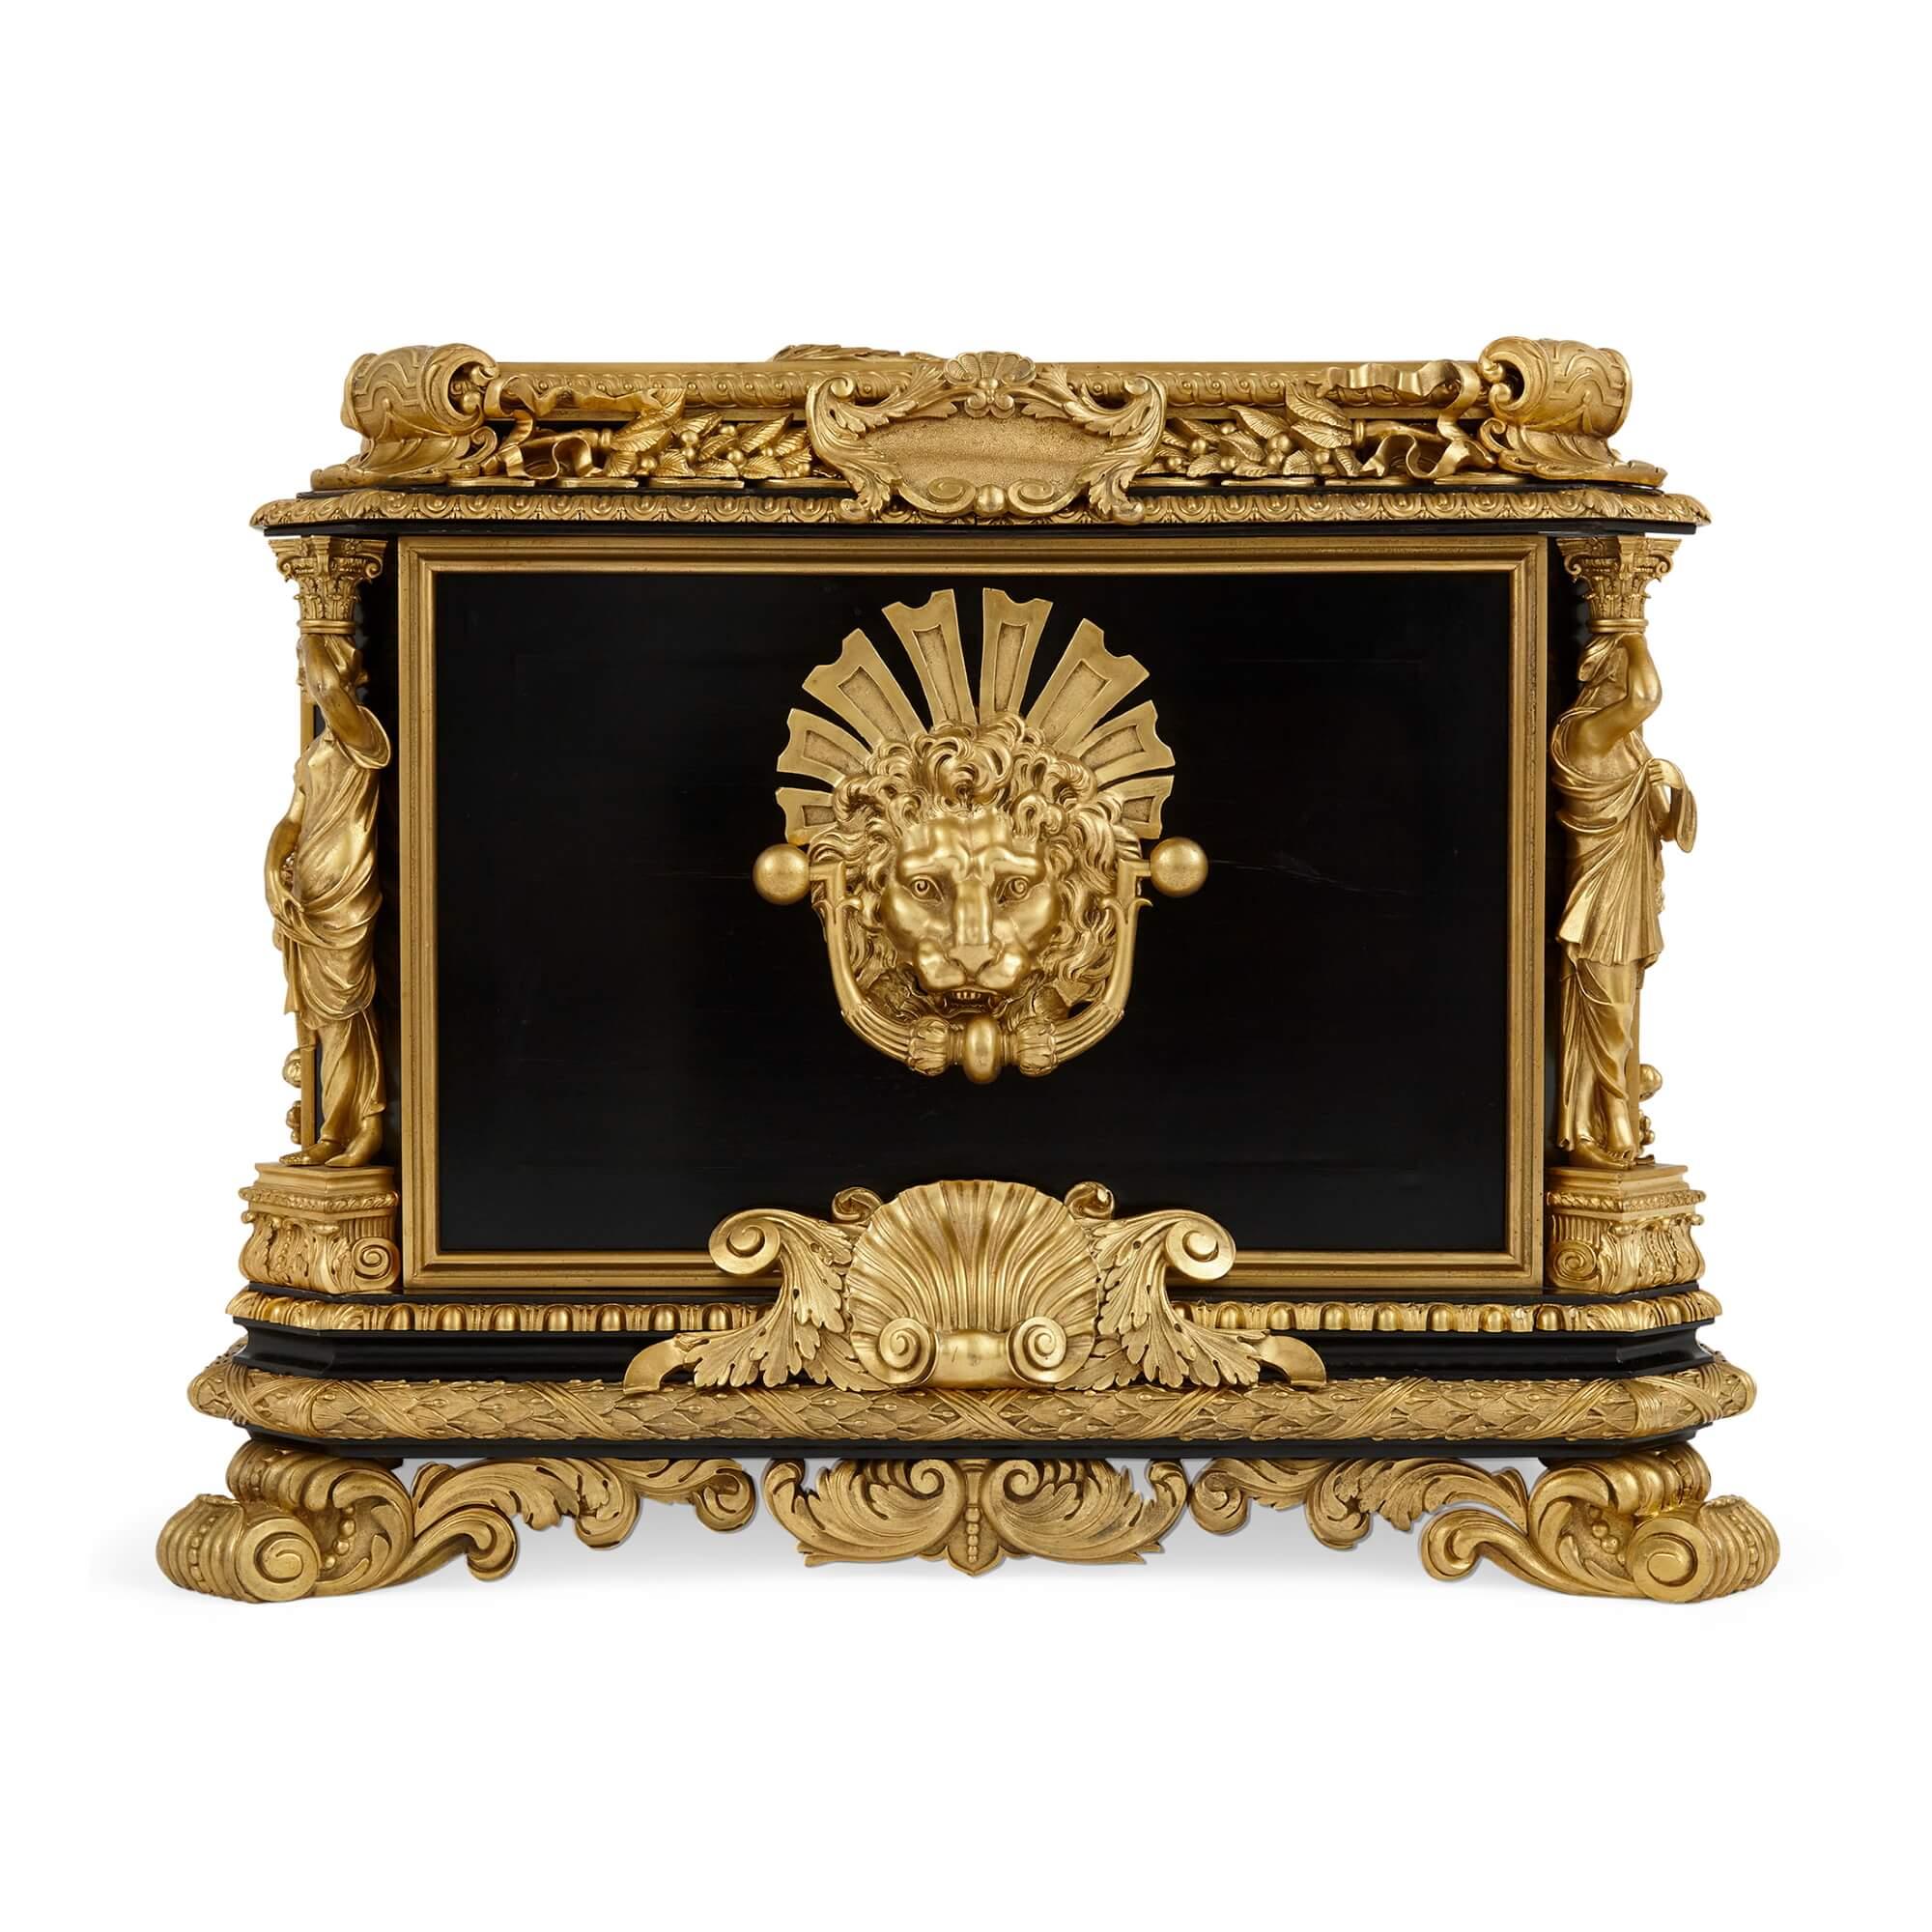 English Magnificent and large ormolu and hardstone Regency period ebonized wooden casket For Sale